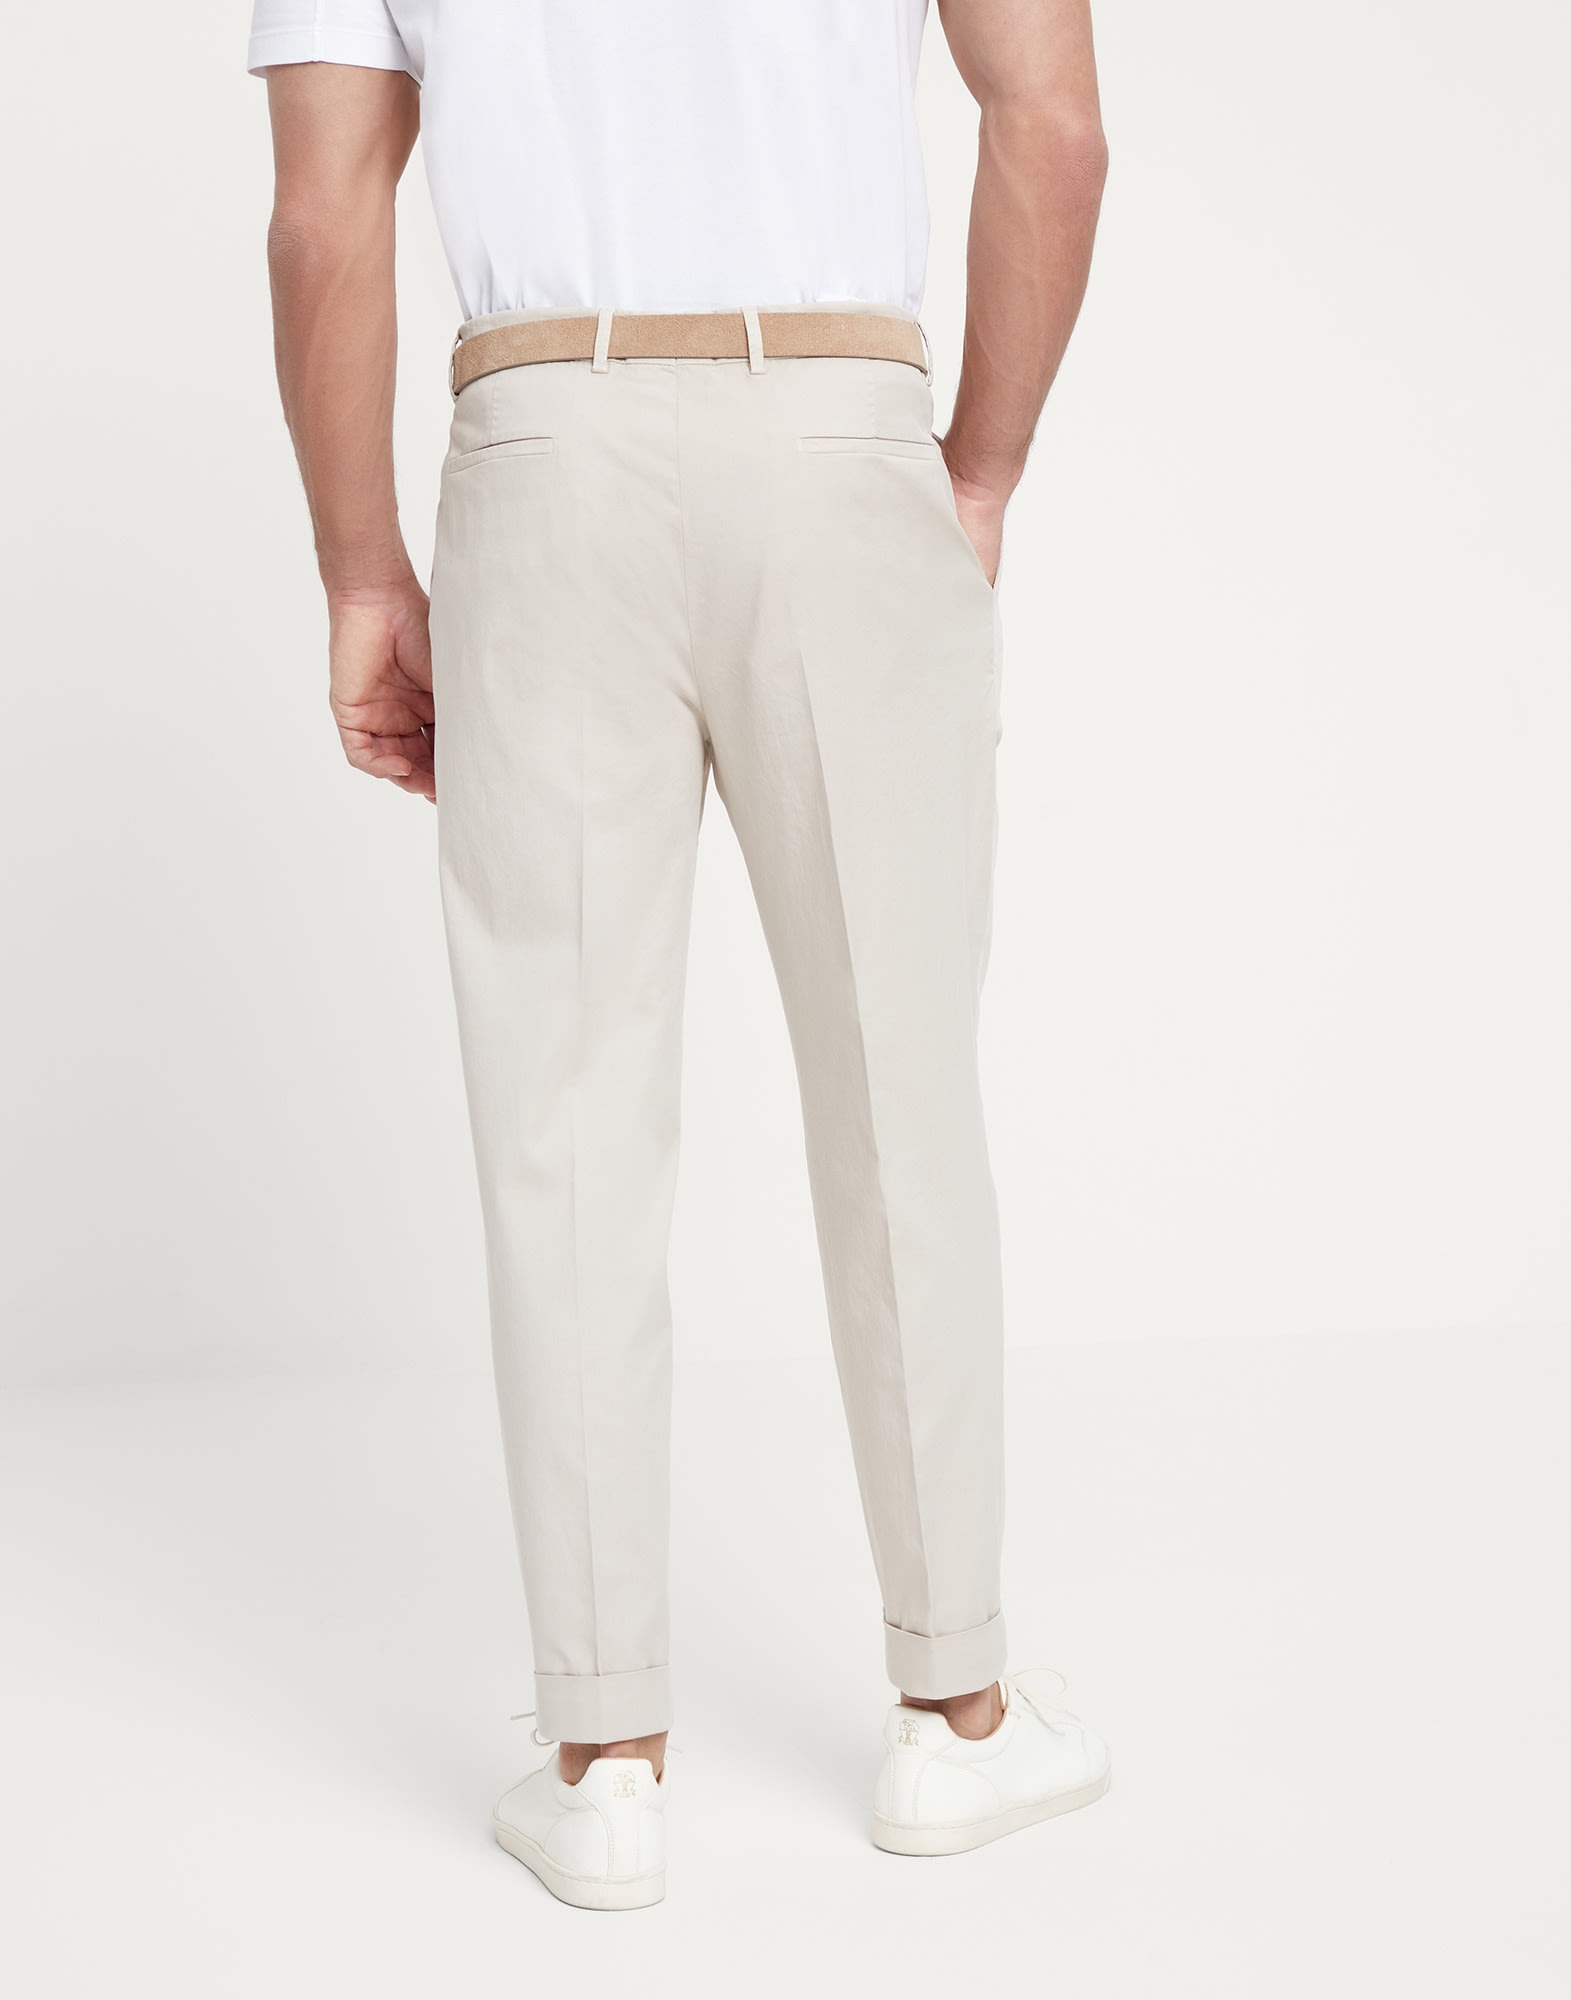 Garment-dyed leisure fit trousers in American Pima cotton comfort gabardine with pleat - 2